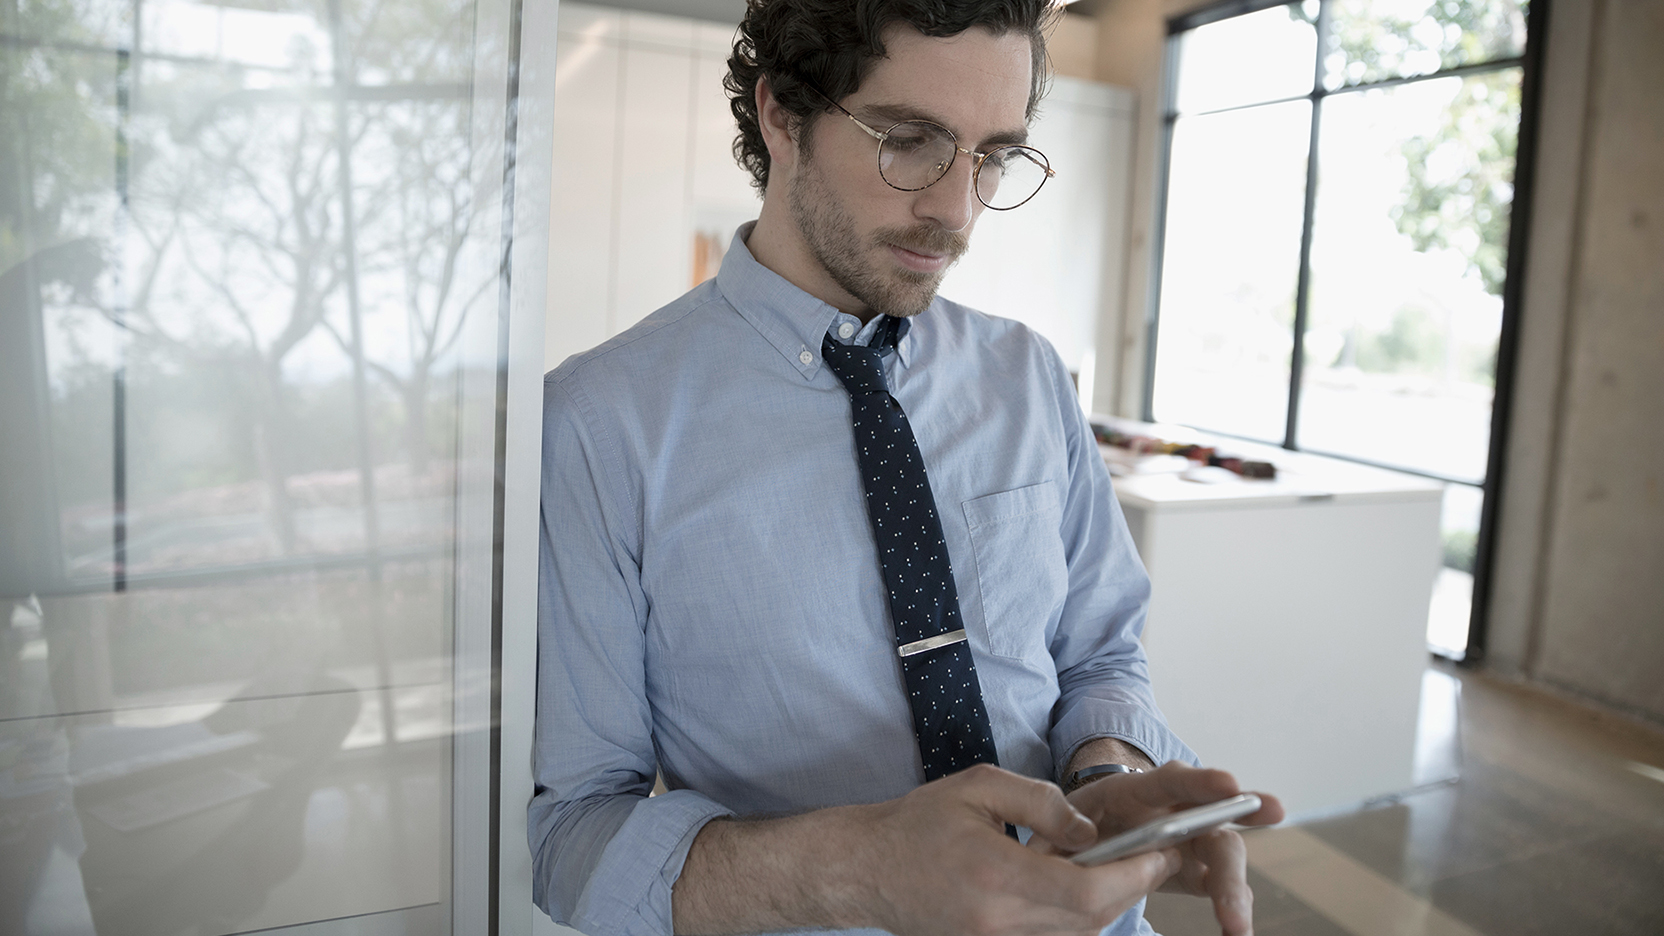 Male in shirt and tie looking at smartphone 